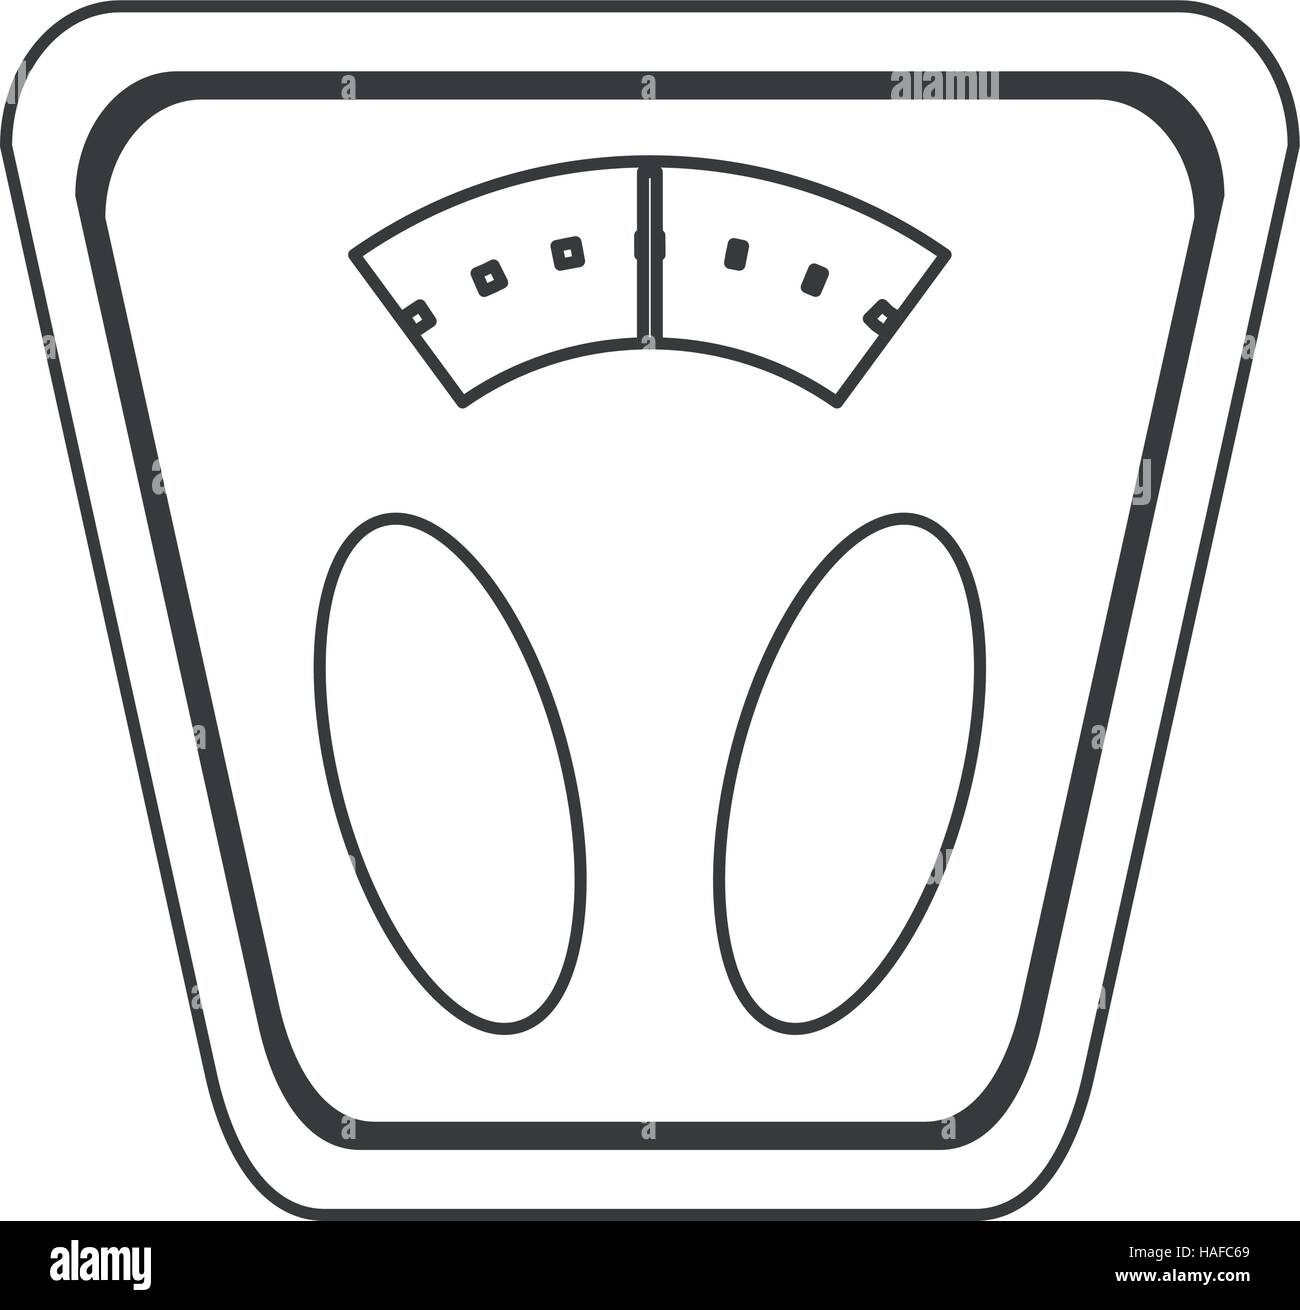 Analog body weight scale icon.